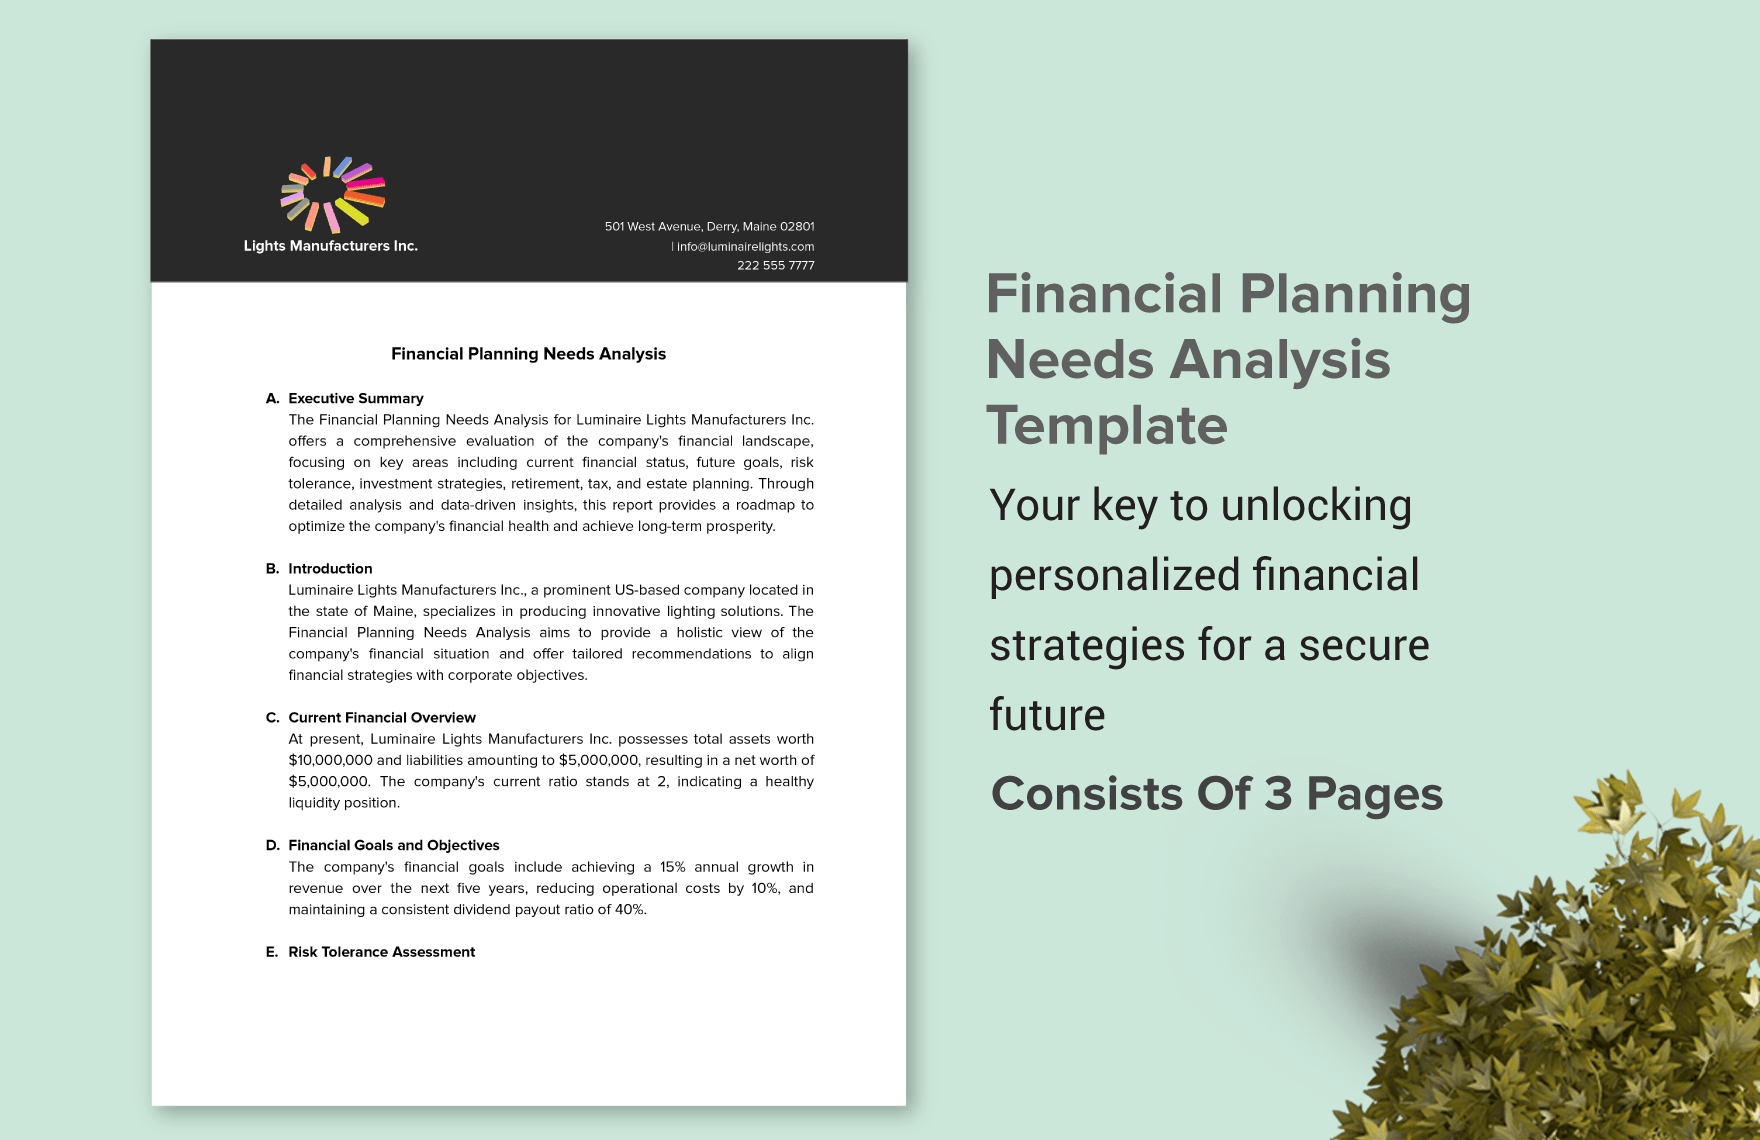 Financial Planning Needs Analysis Template